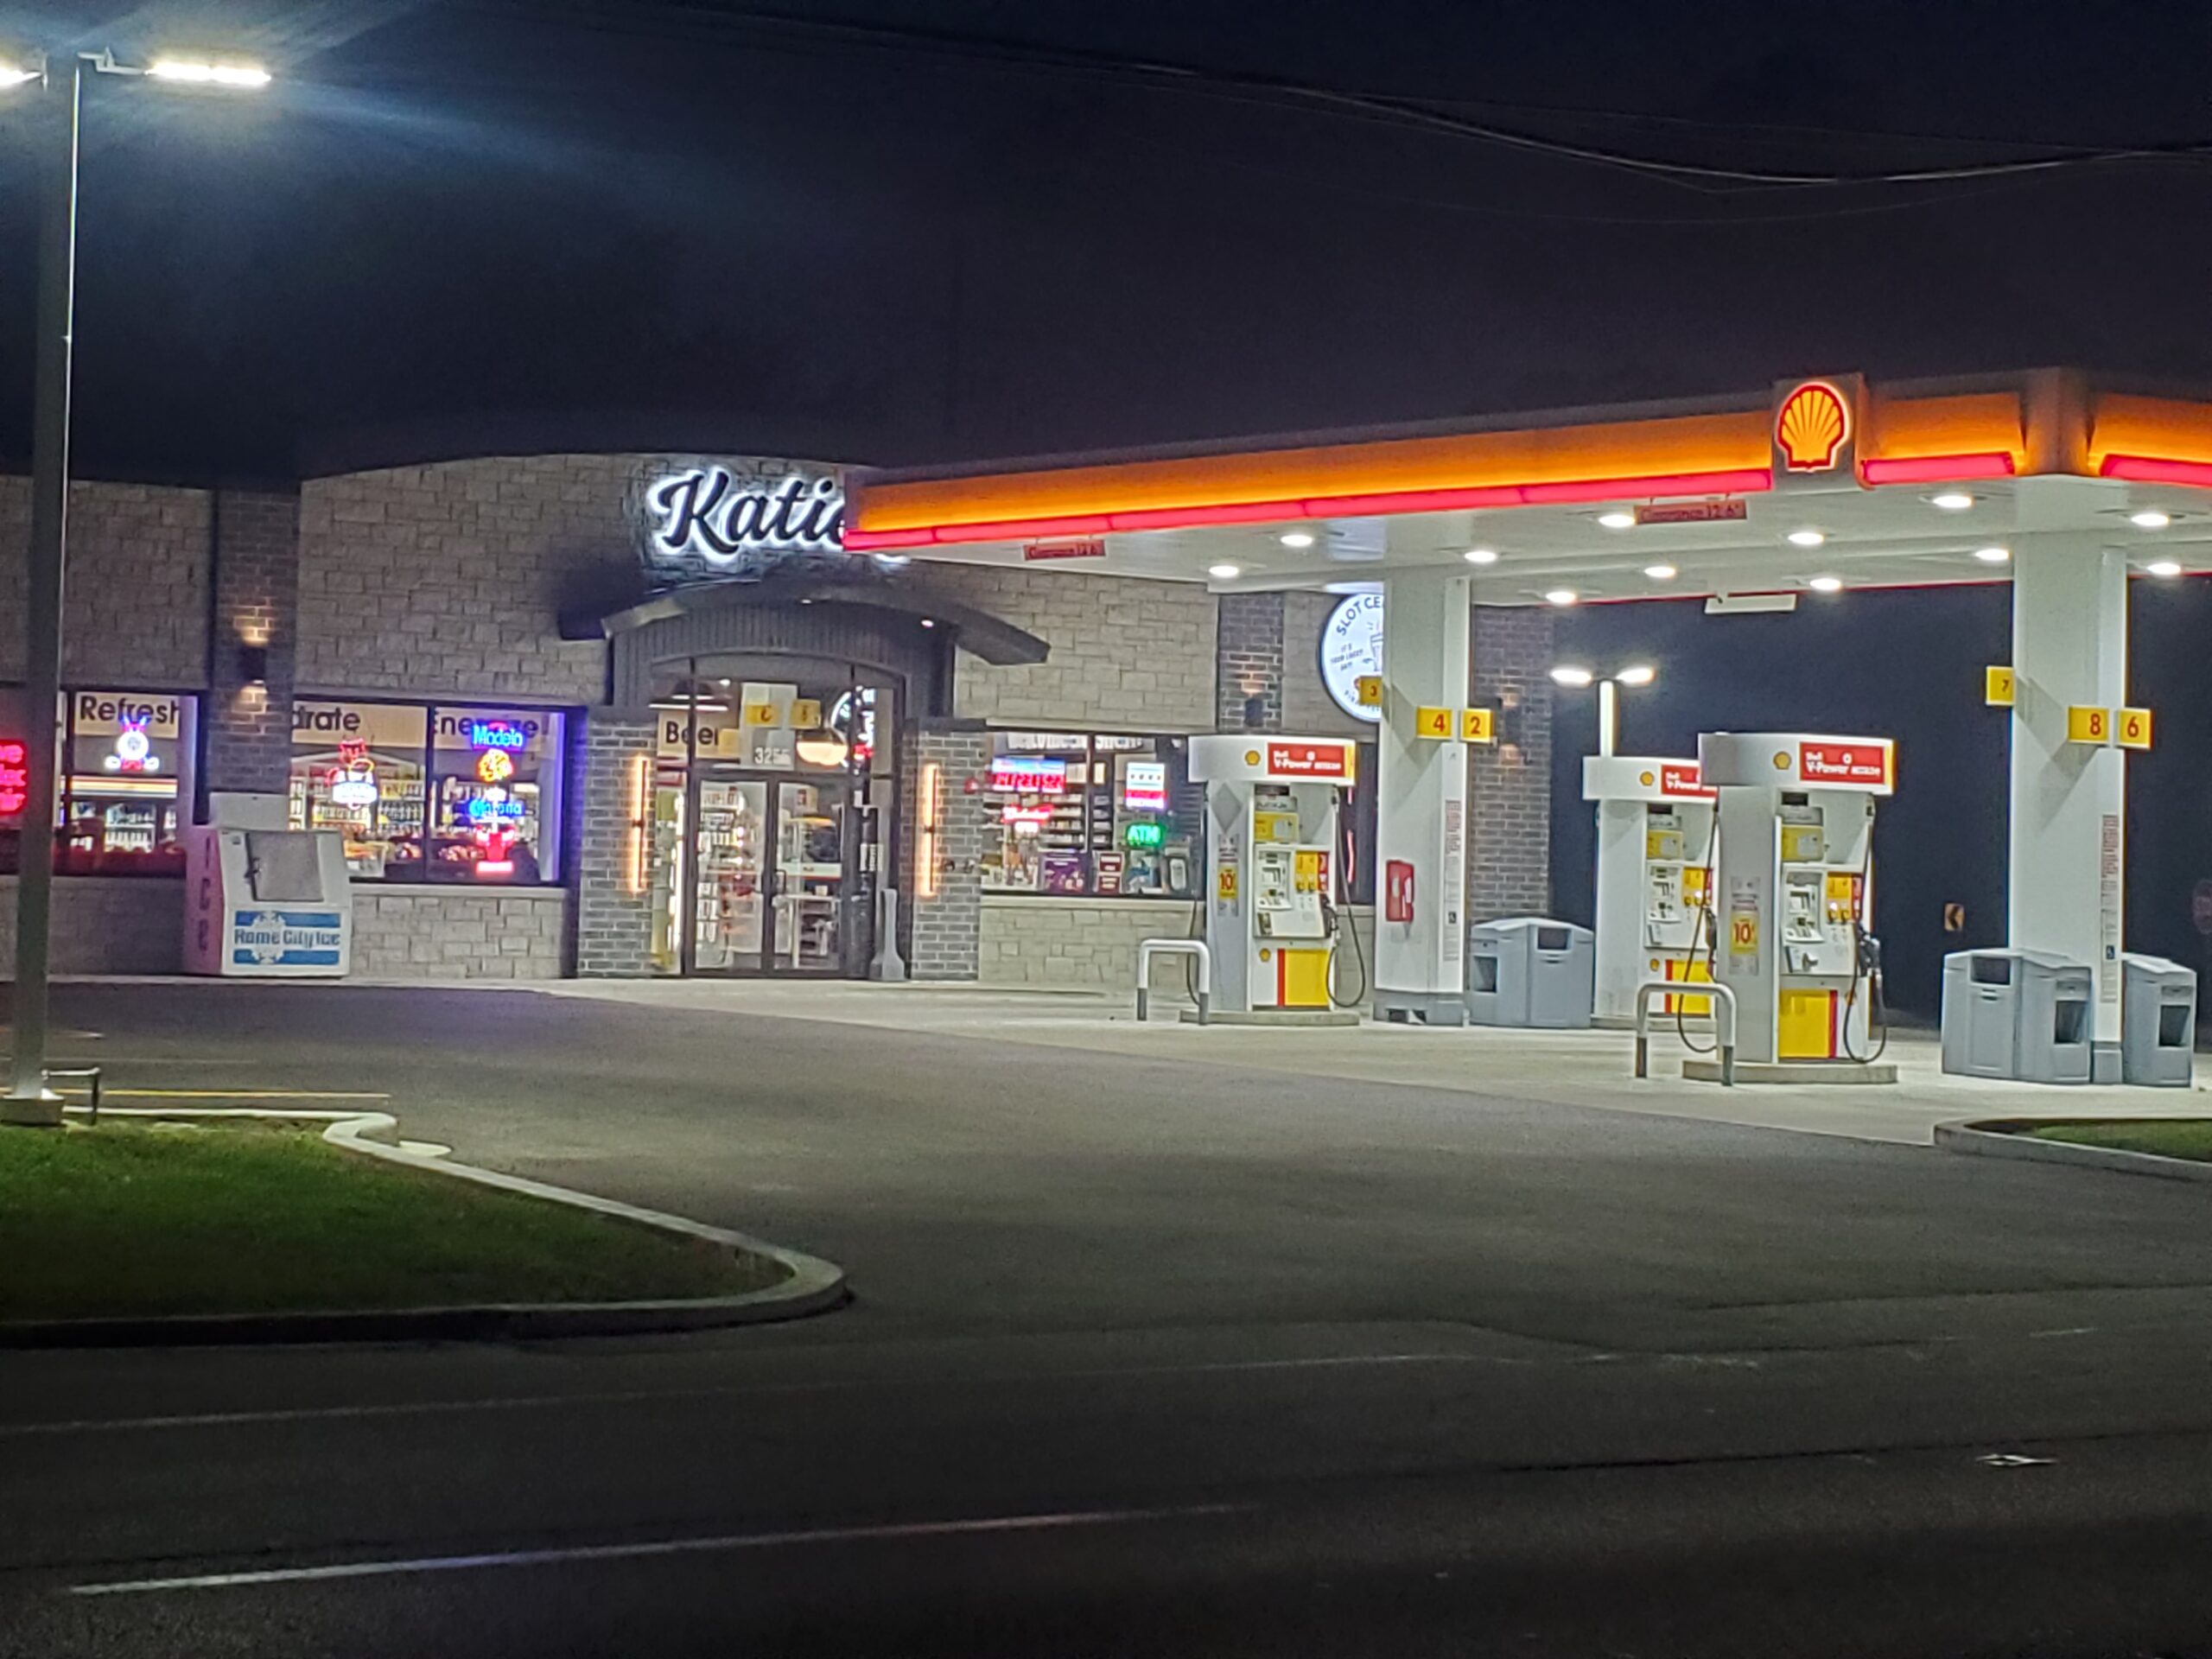 Photo of a Katie's gas station at night with bright overhead lights